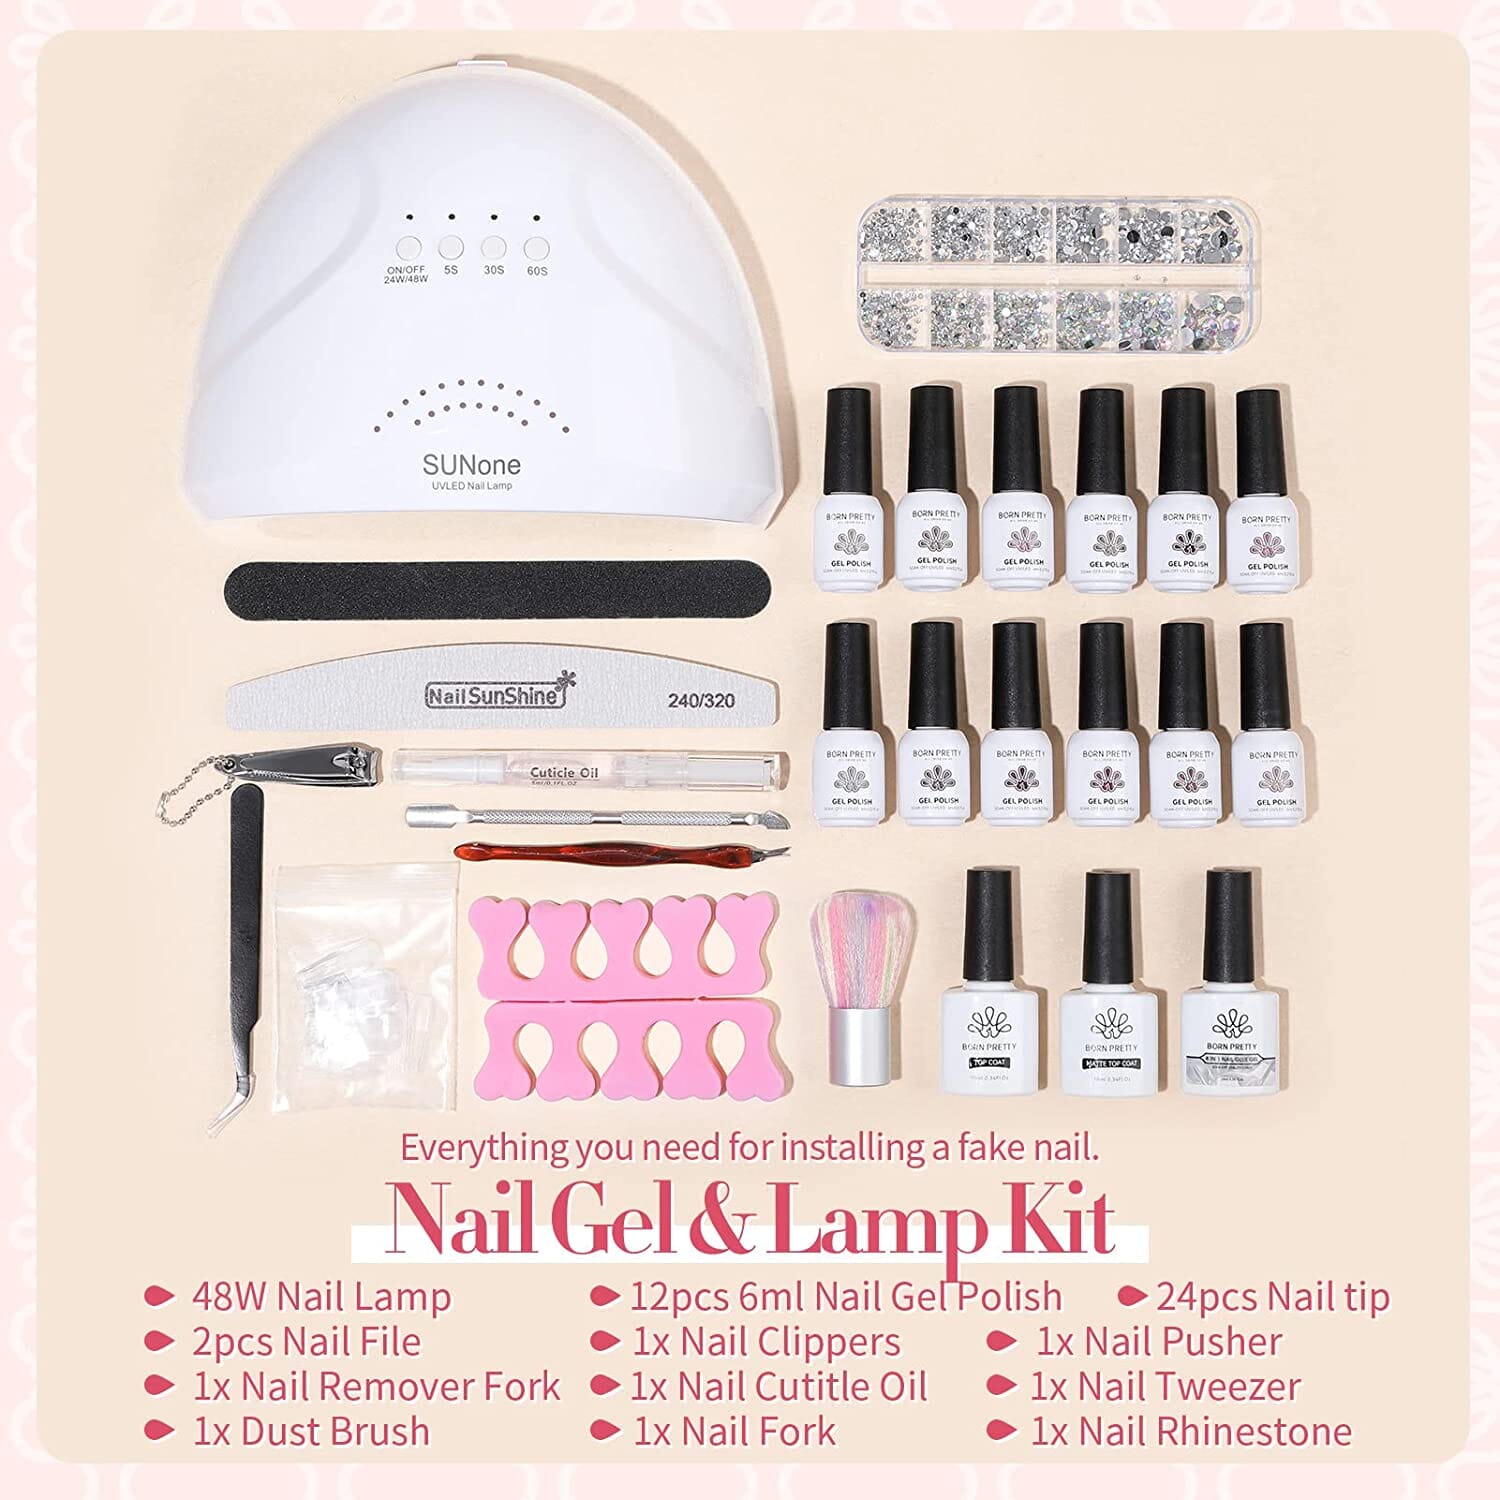 Nail Extension Semi Permanent Uv Varnish Kit With Lamp Everything For  Manicure Set Nails Gel Complete Kit Gel Nails Starter Kit - Nail Sets & Kits  - AliExpress